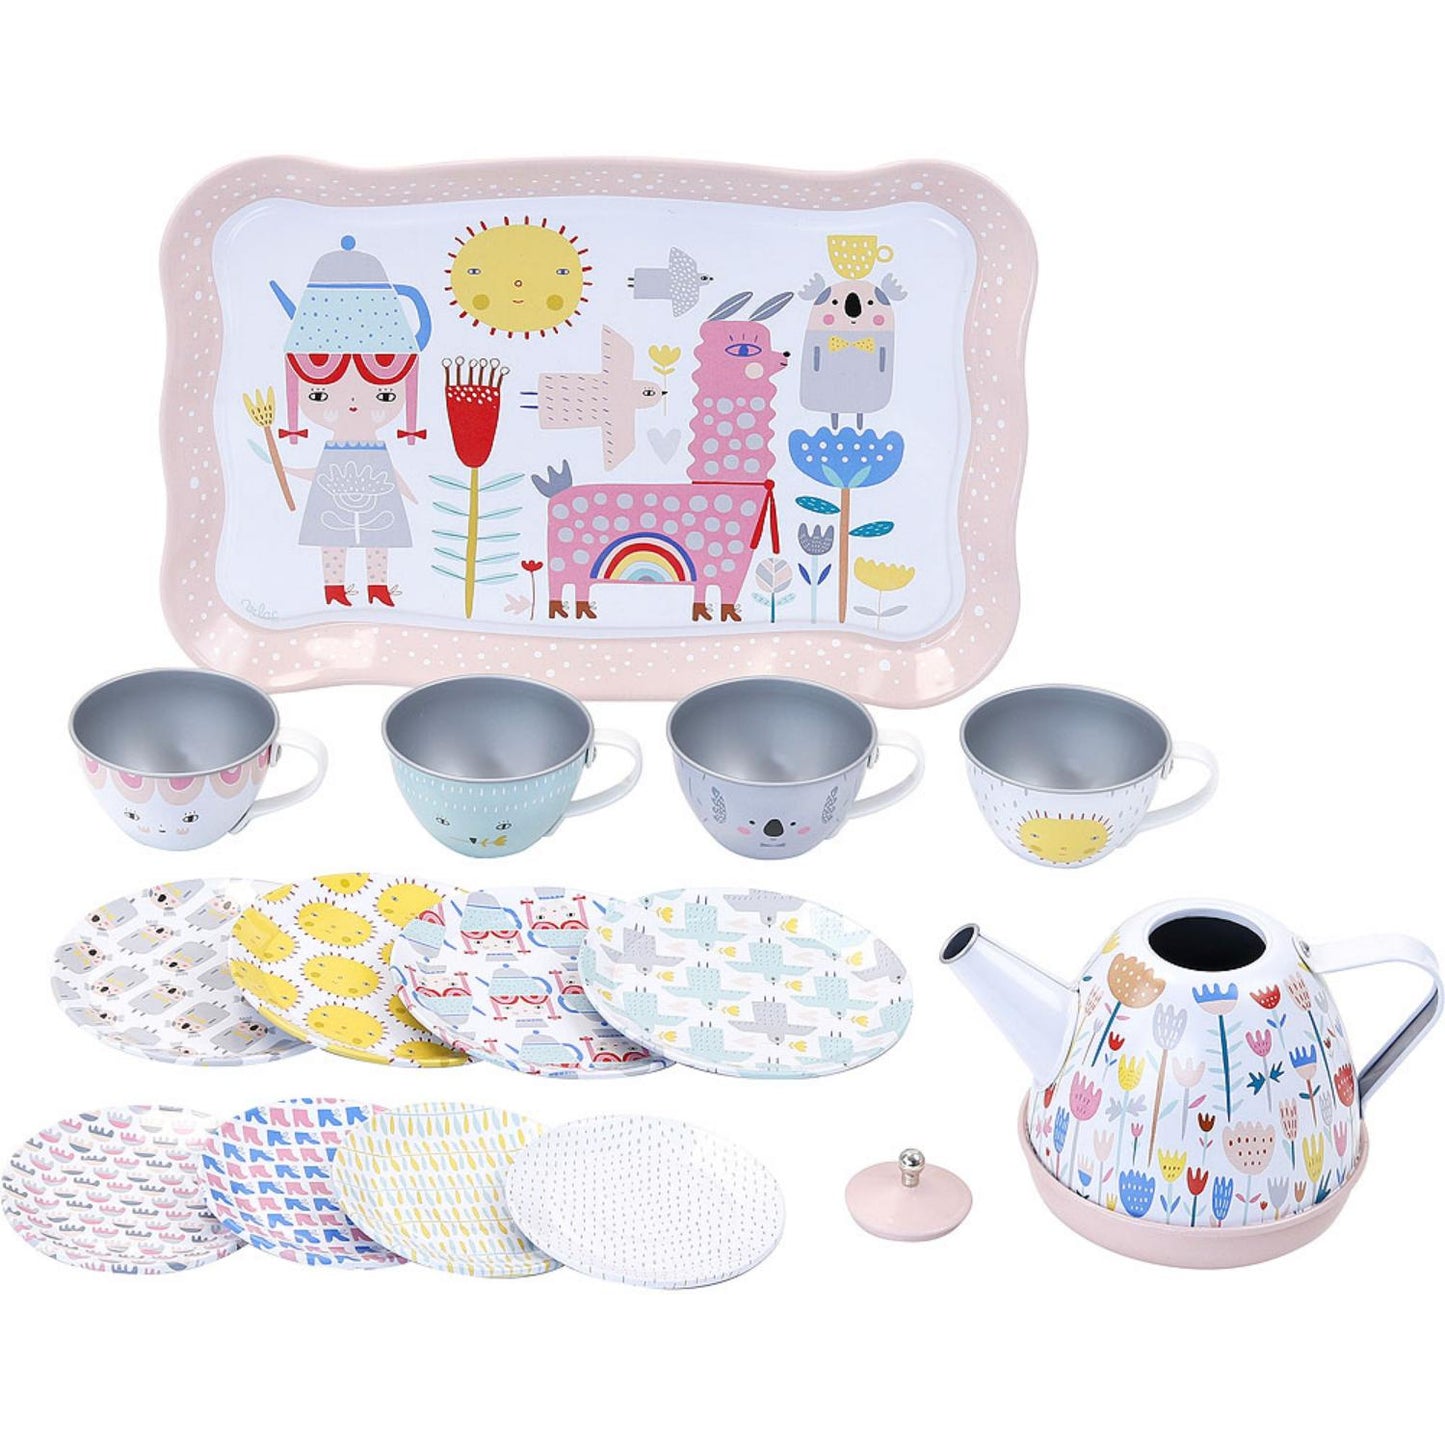 Musical Tea Set with Suitcase | Teapot Plays Melody While Pouring Tea | Pretend Play Toy Tableware